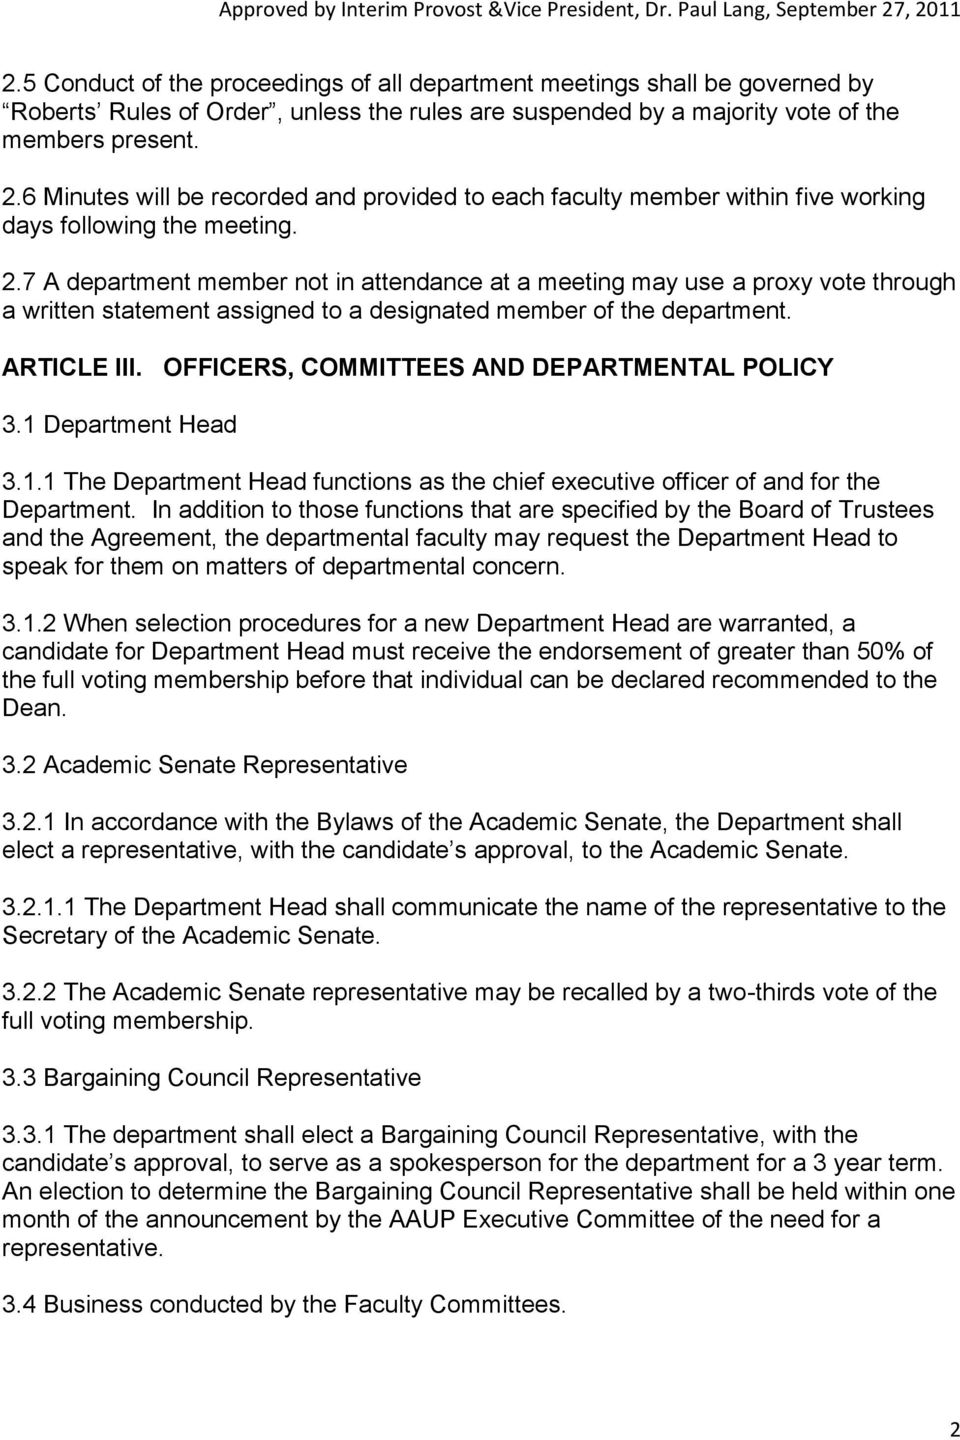 7 A department member not in attendance at a meeting may use a proxy vote through a written statement assigned to a designated member of the department. ARTICLE III.